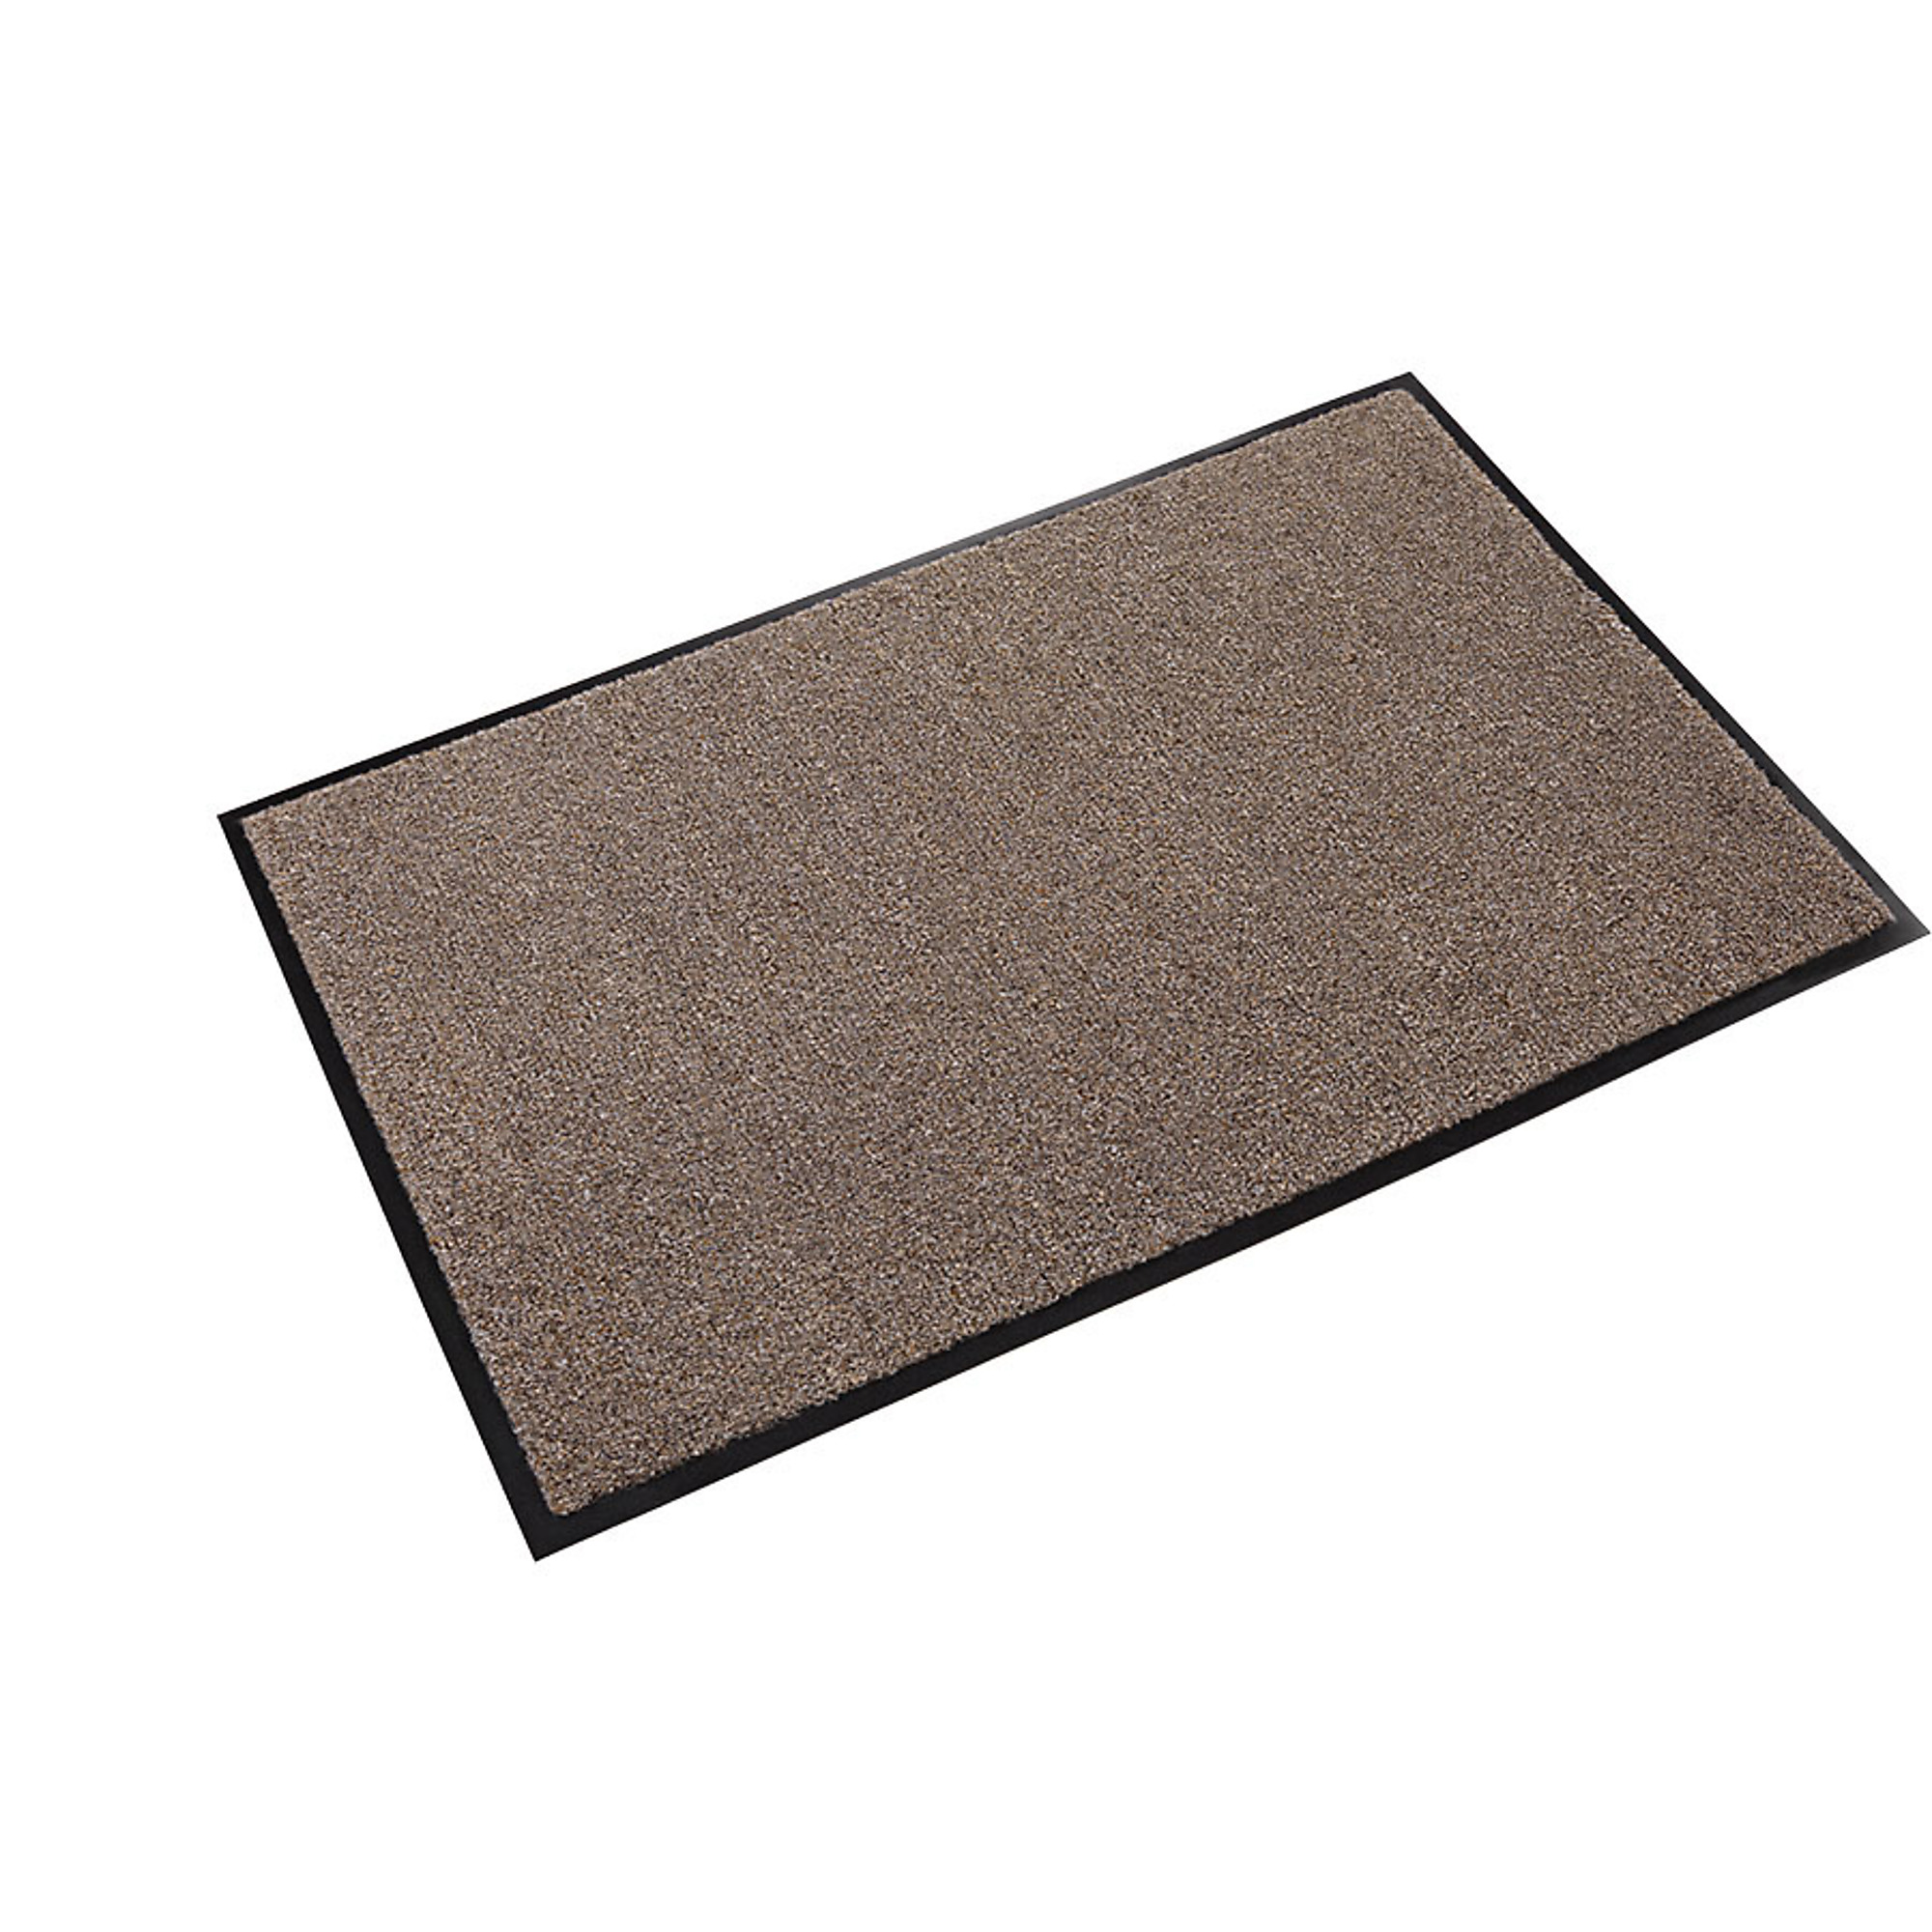 Crown Matting Technologies, Rely-On Olefin 3ft.x5ft. Pebble Brown, Width 36 in, Length 60 in, Thickness 3/8 in, Model GS 0035PB